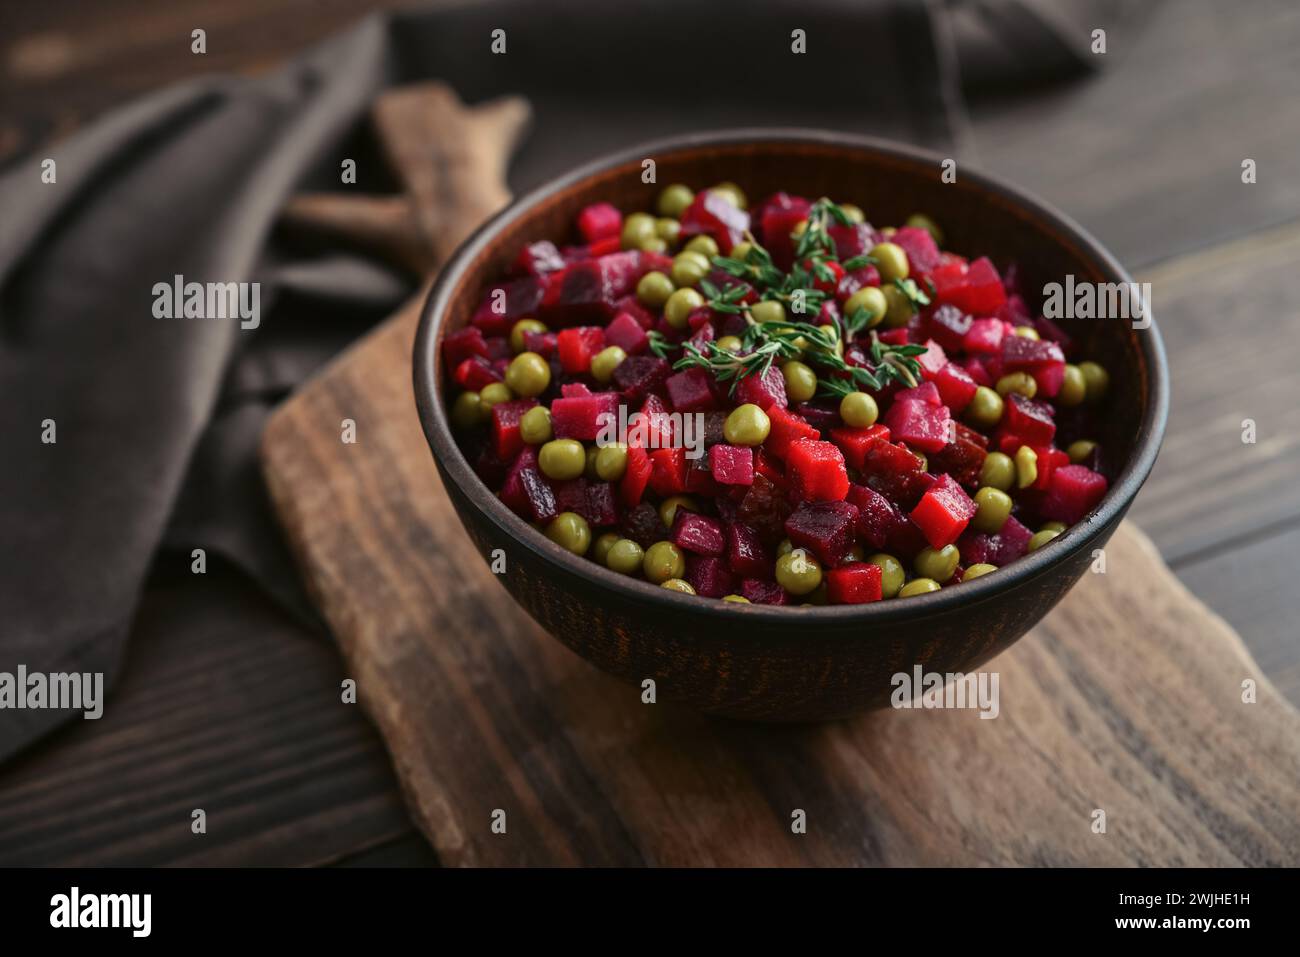 Vinegret - traditional Russian vegetable salad in bowl on wooden background, closeup Stock Photo